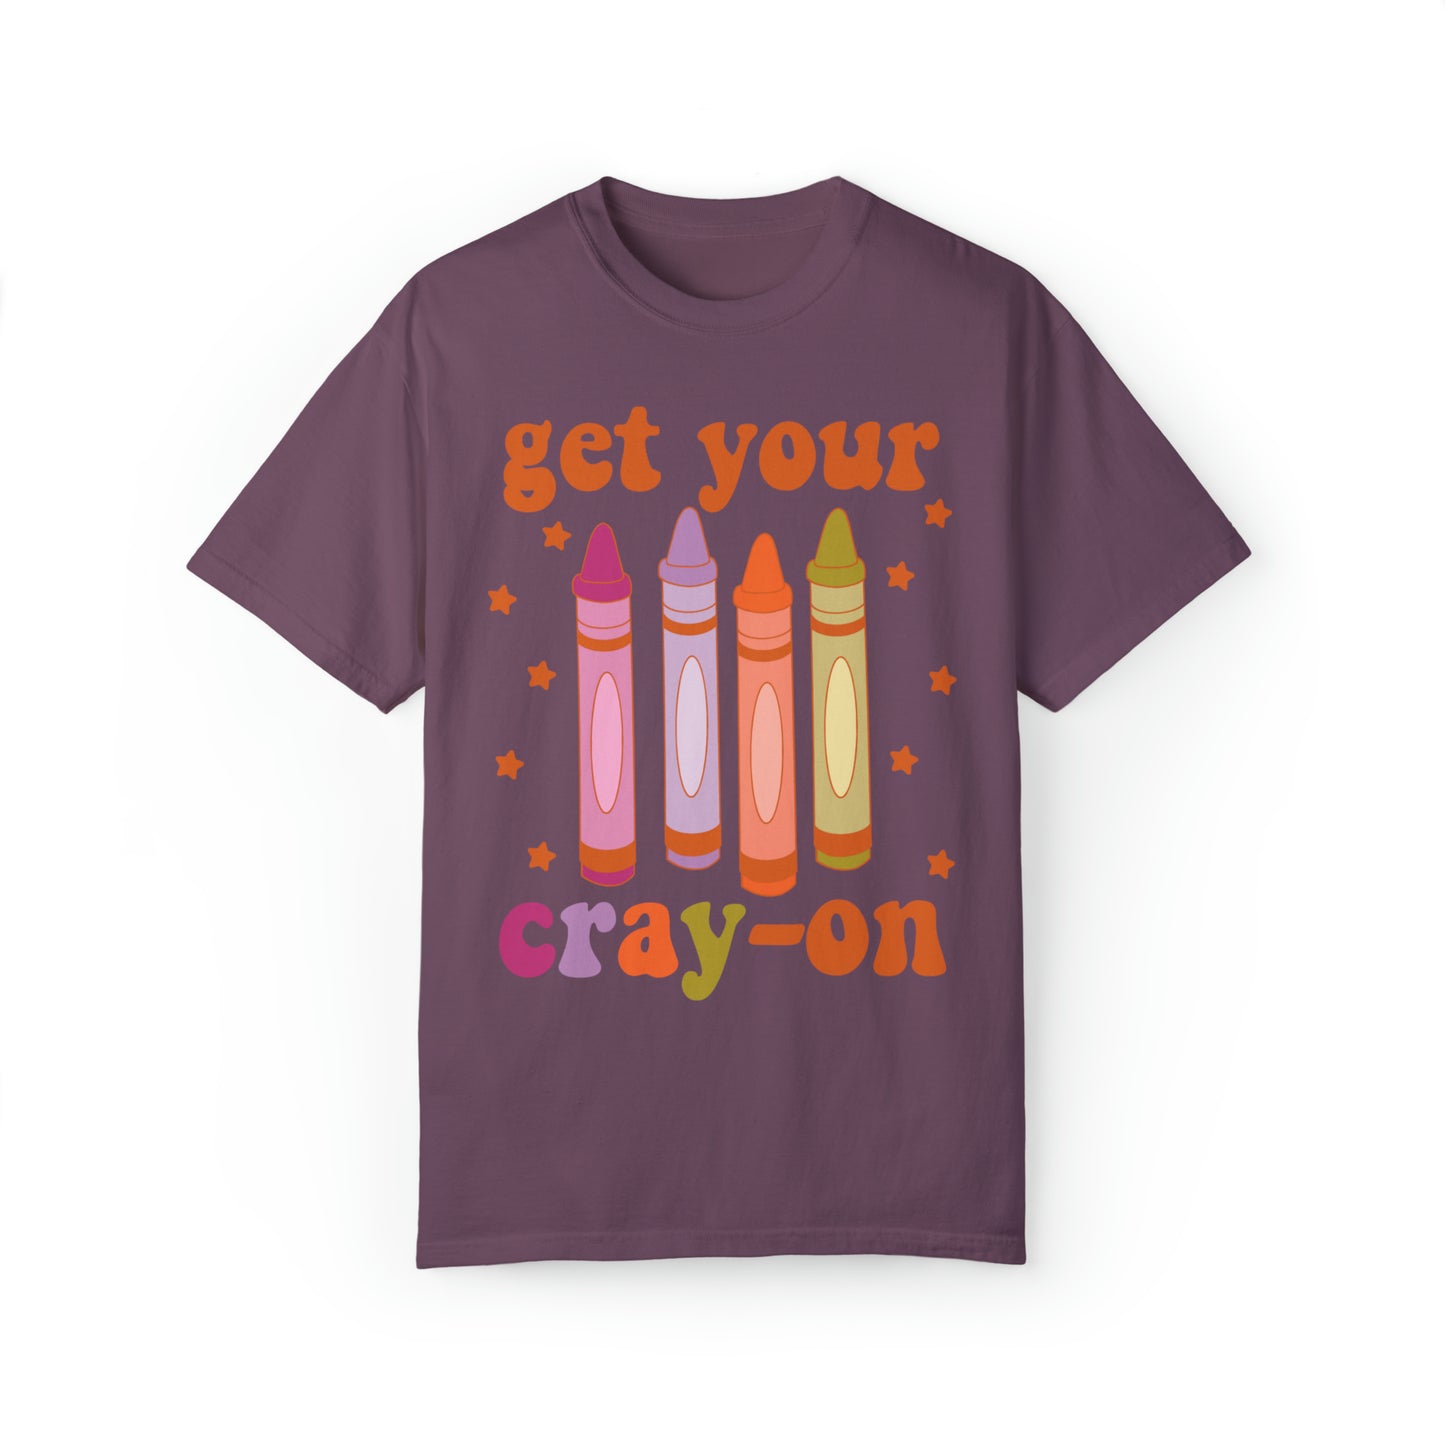 "Get Your Cray-On" Comfort Colors Oversized T-shirt